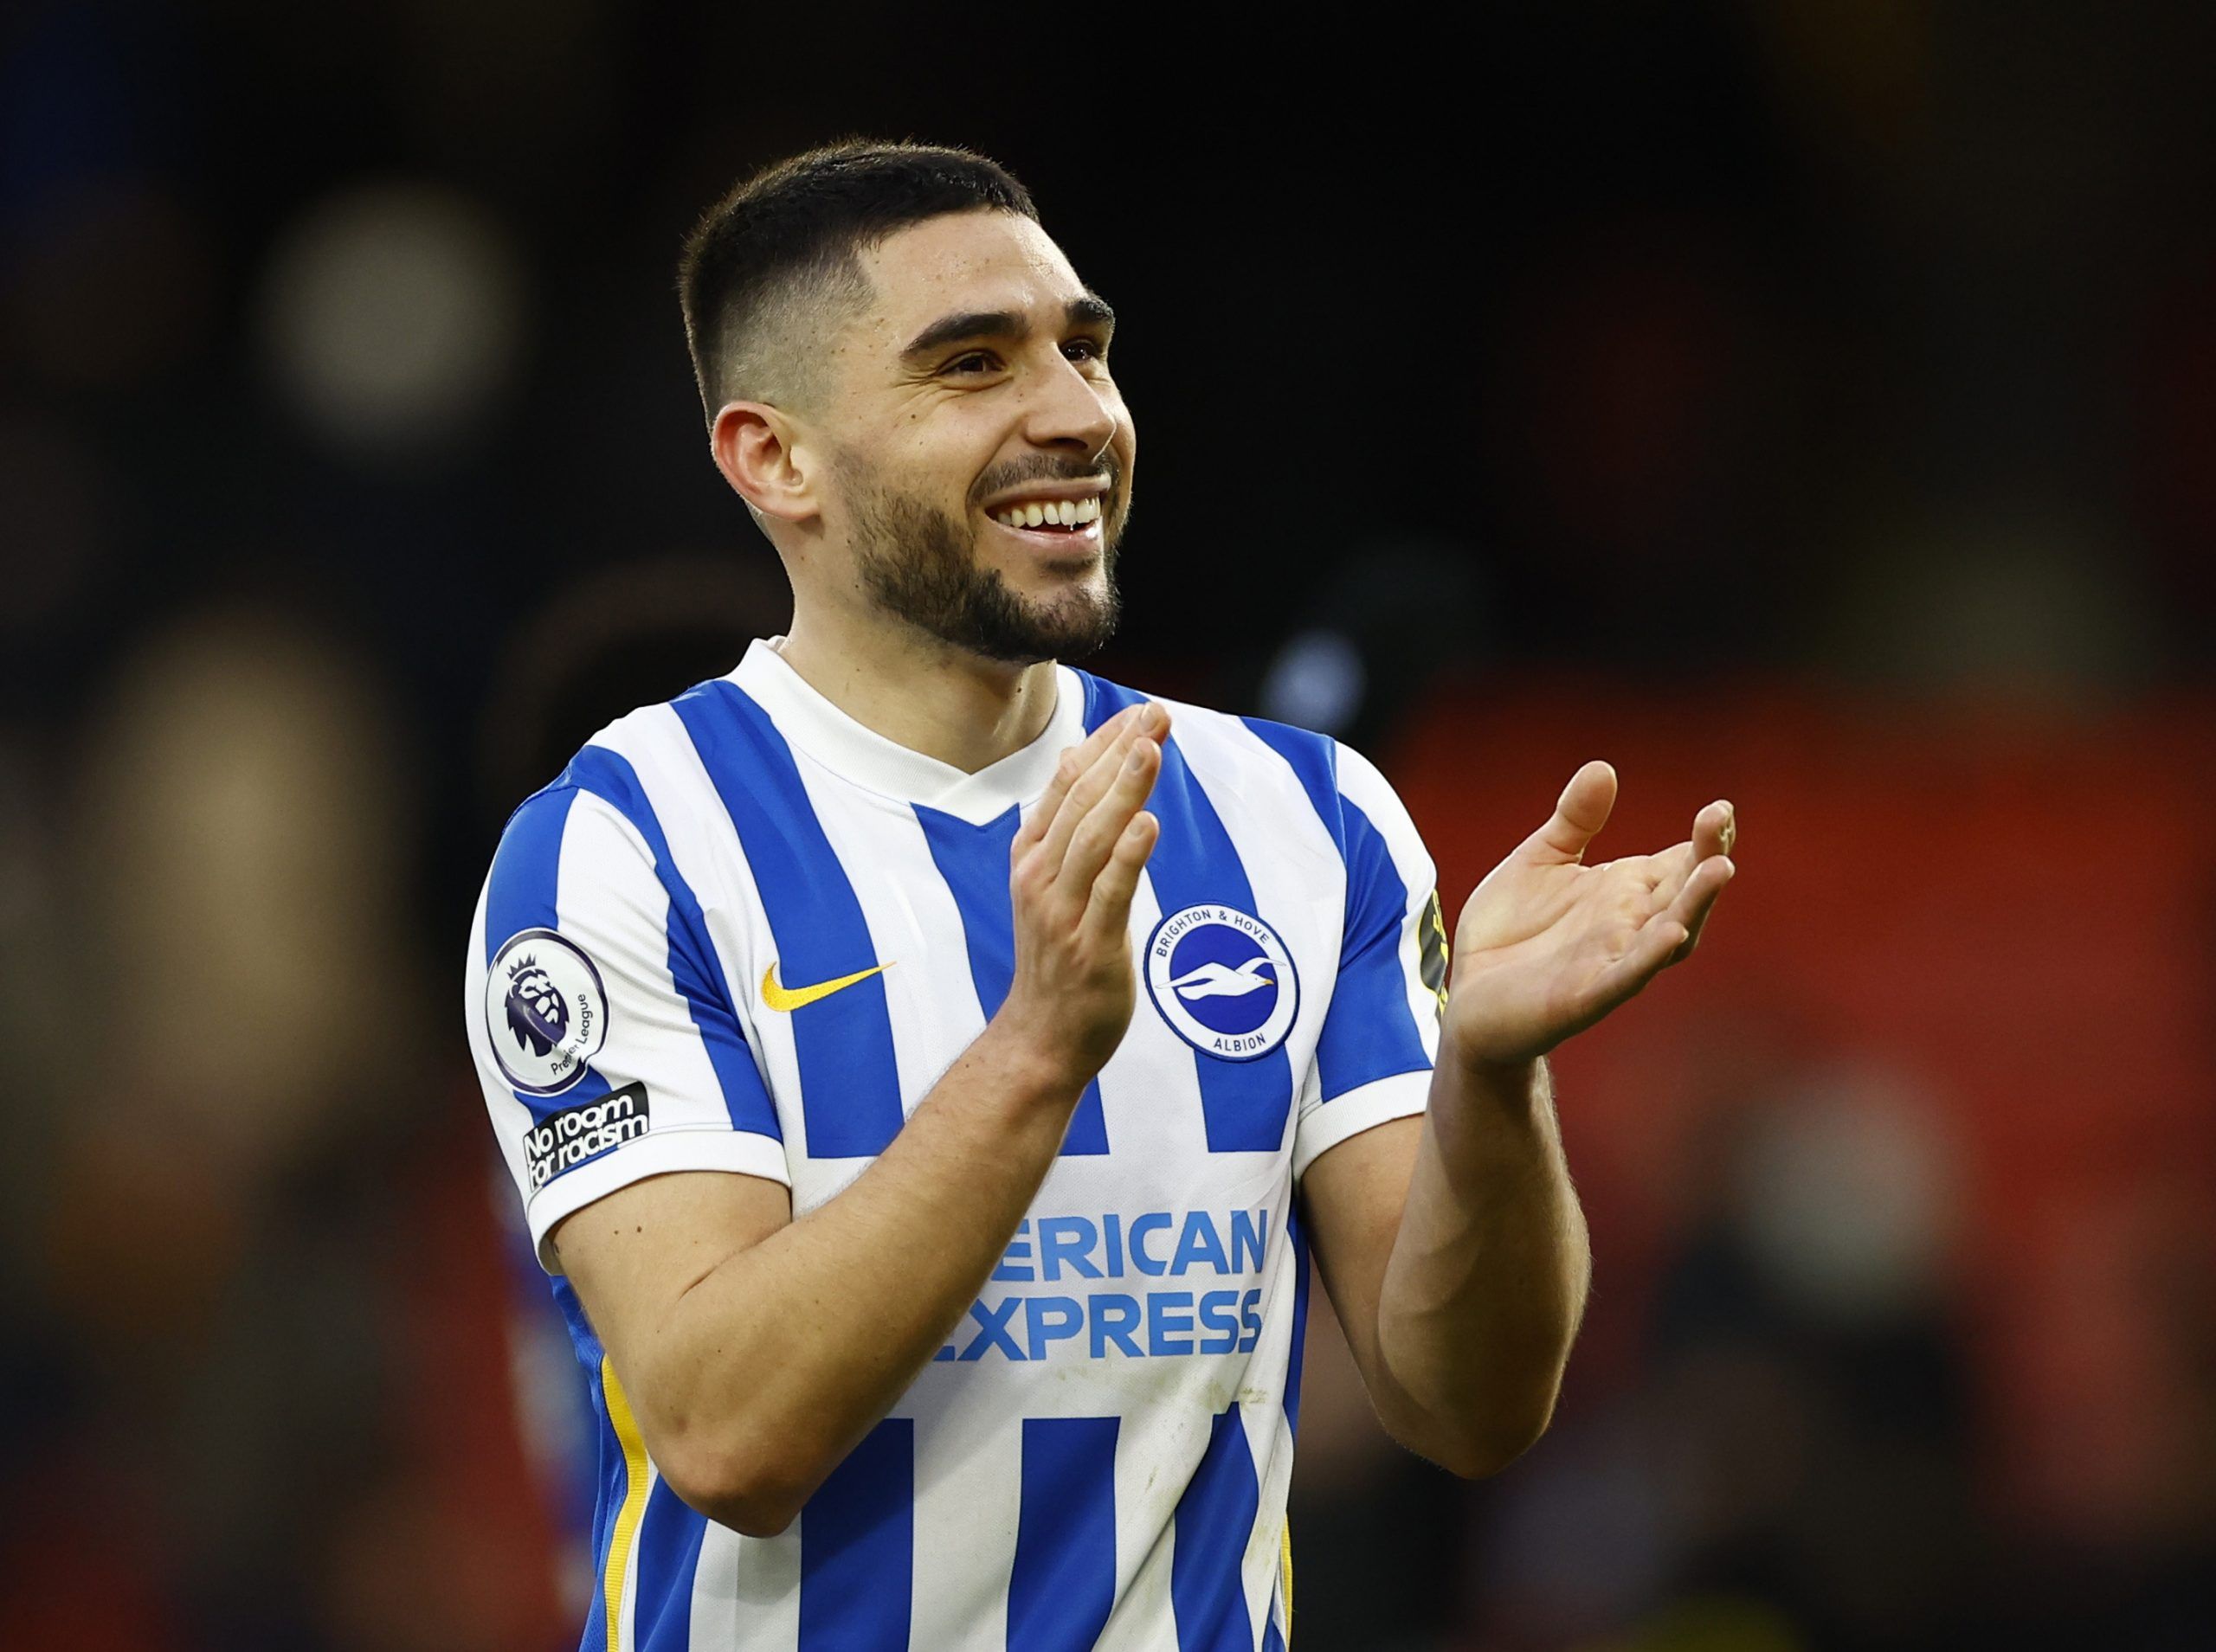 Nottingham Forest: Reporter shares Neal Maupay latest -Follow up